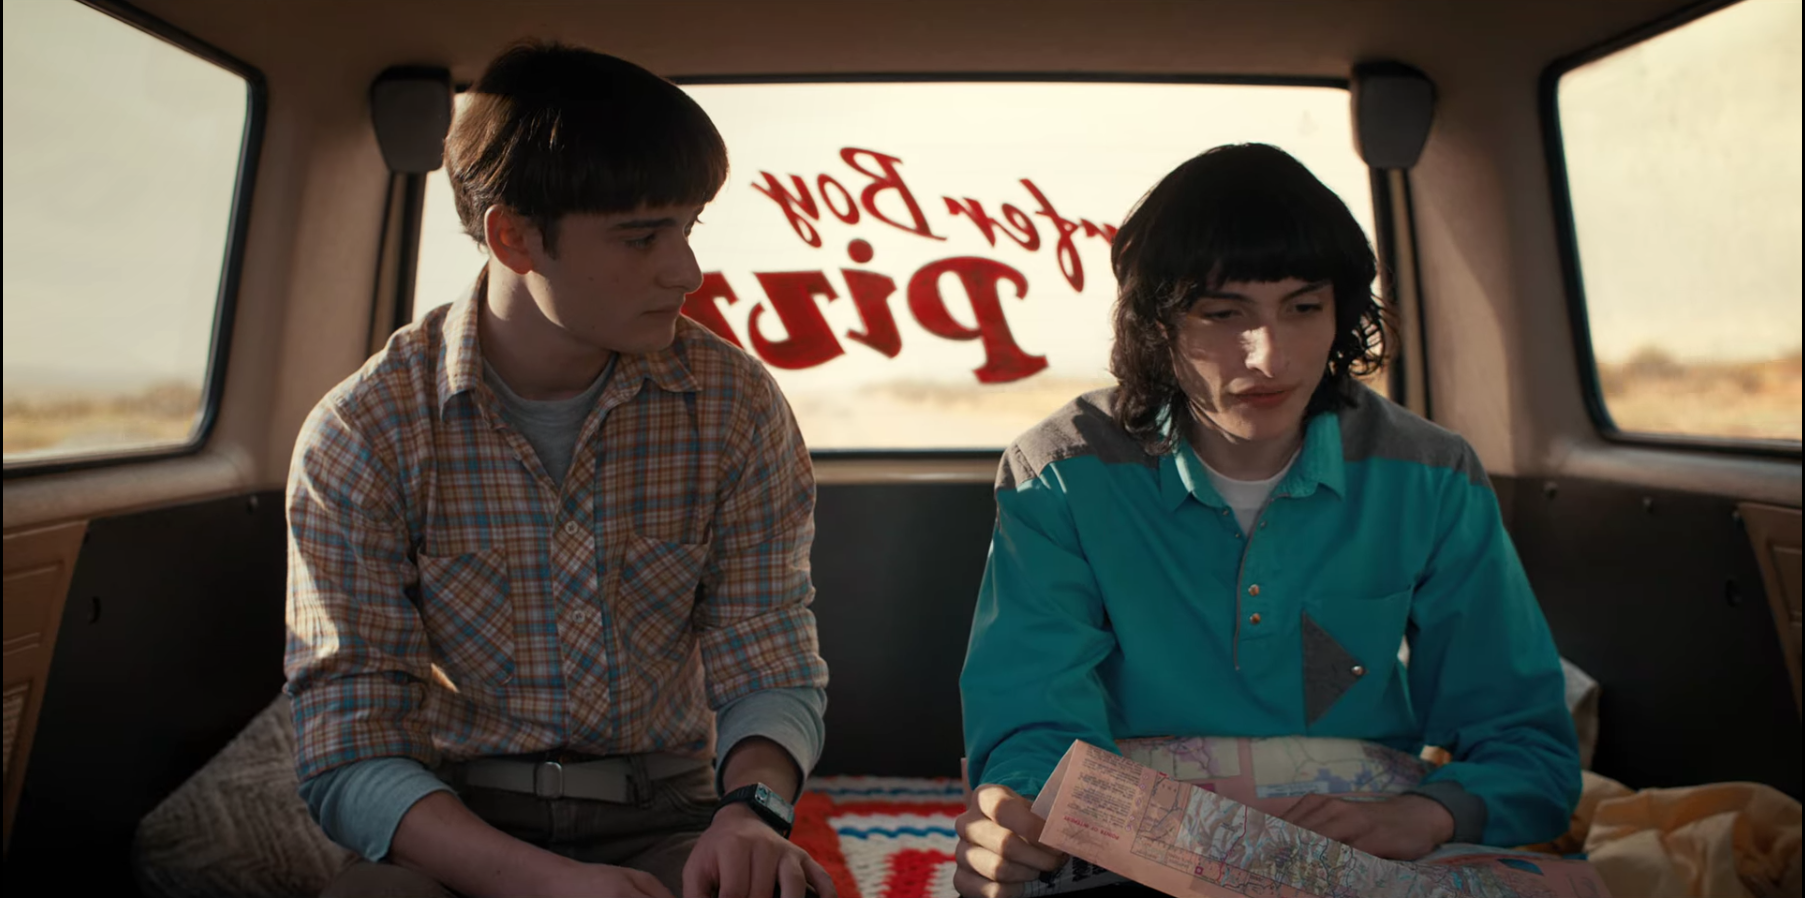 Noah Schnapp and Finn Wolfhard as Will and Mike in Stranger Things